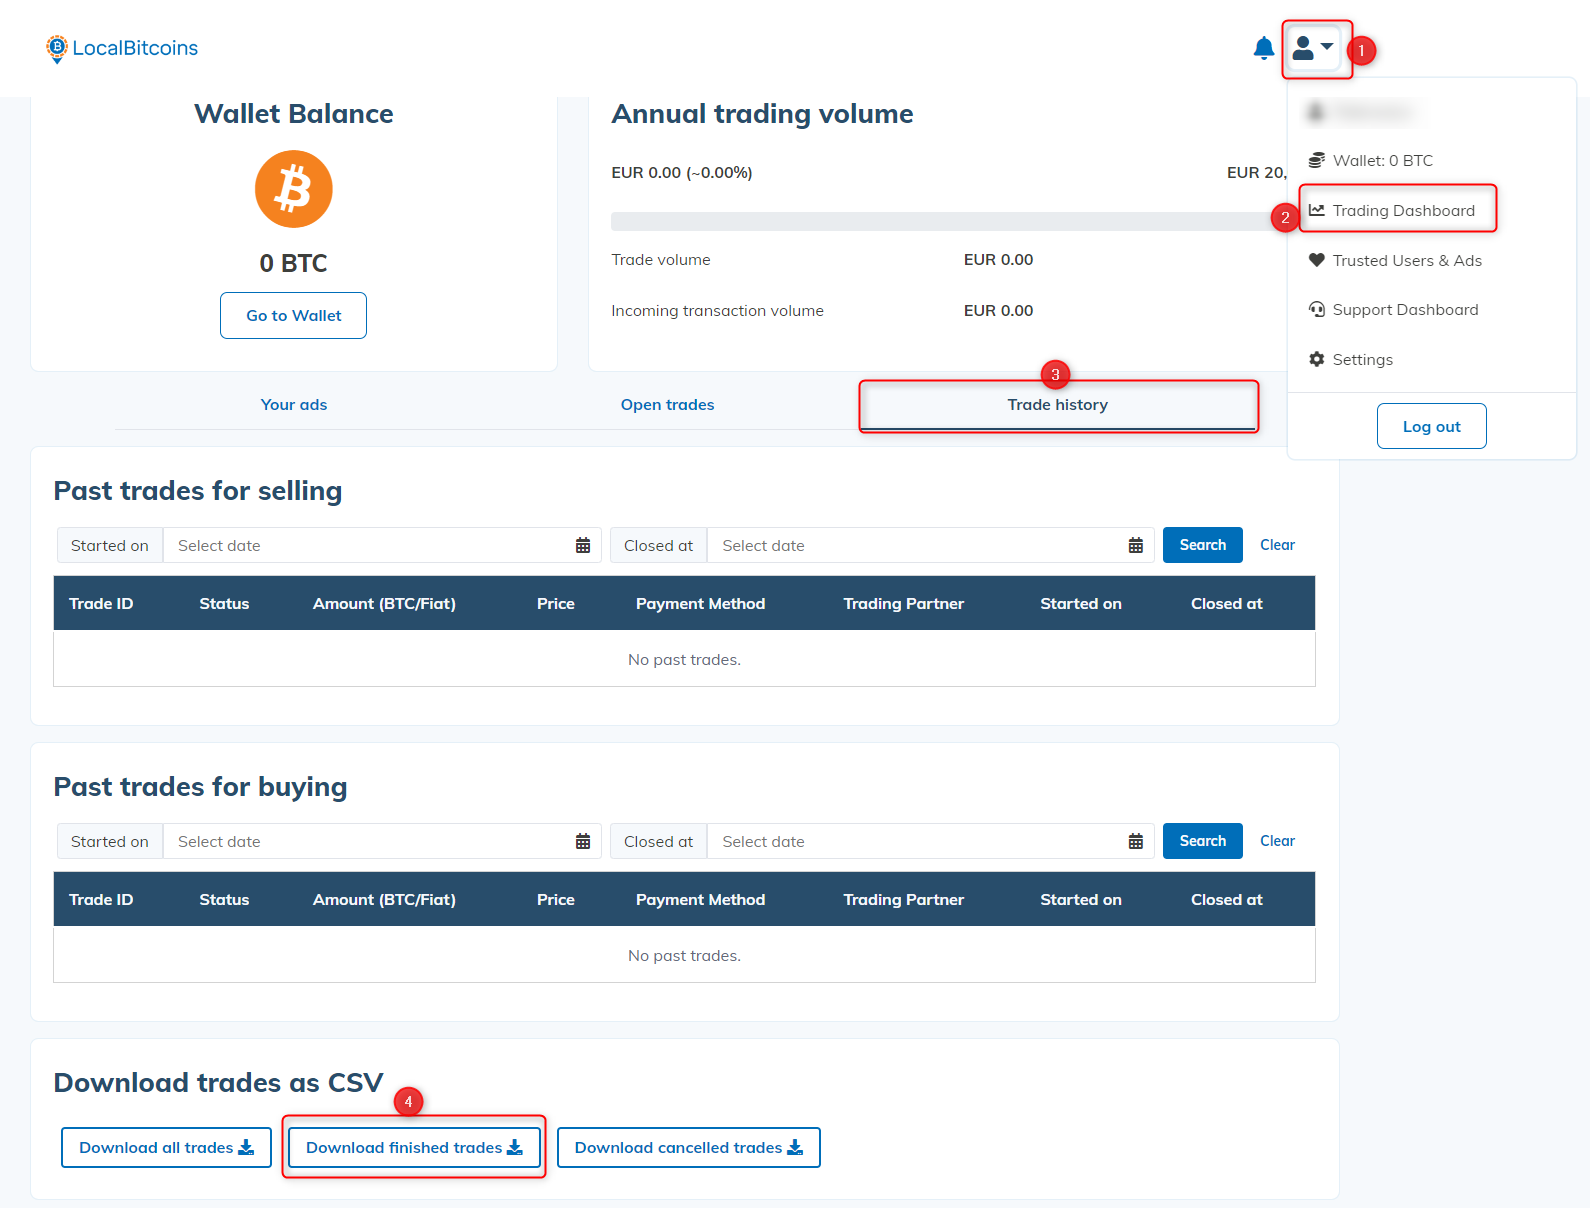 How to export trades from LocalBitcoins